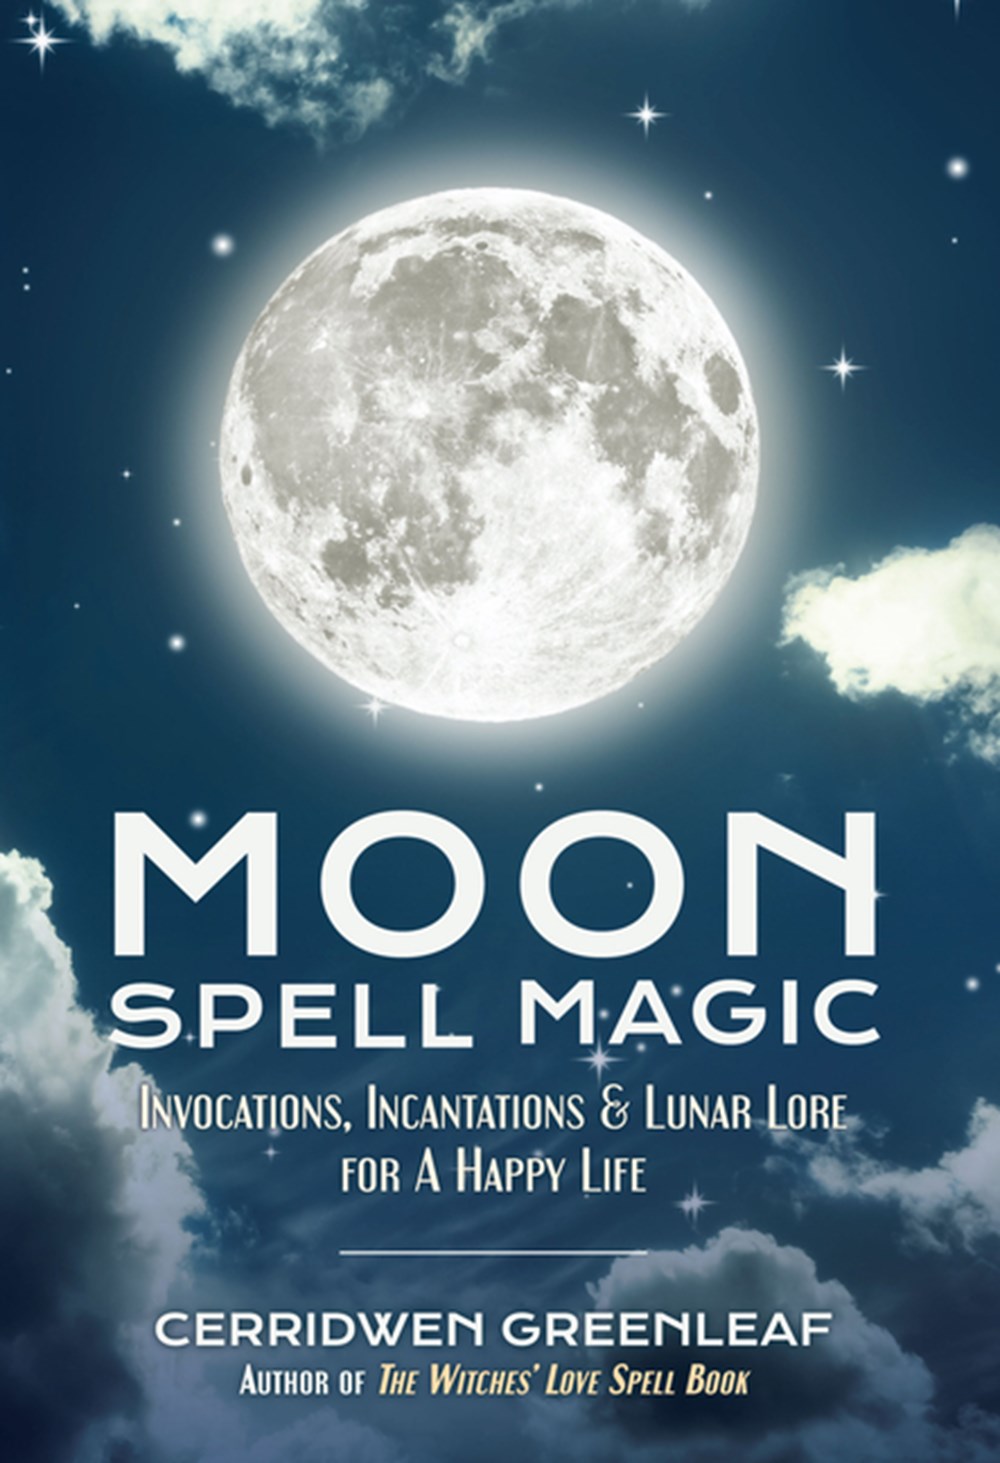 Moon Spell Magic: Invocations, Incantations & Lunar Lore for a Happy Life (Spell Book, Beginners Wit